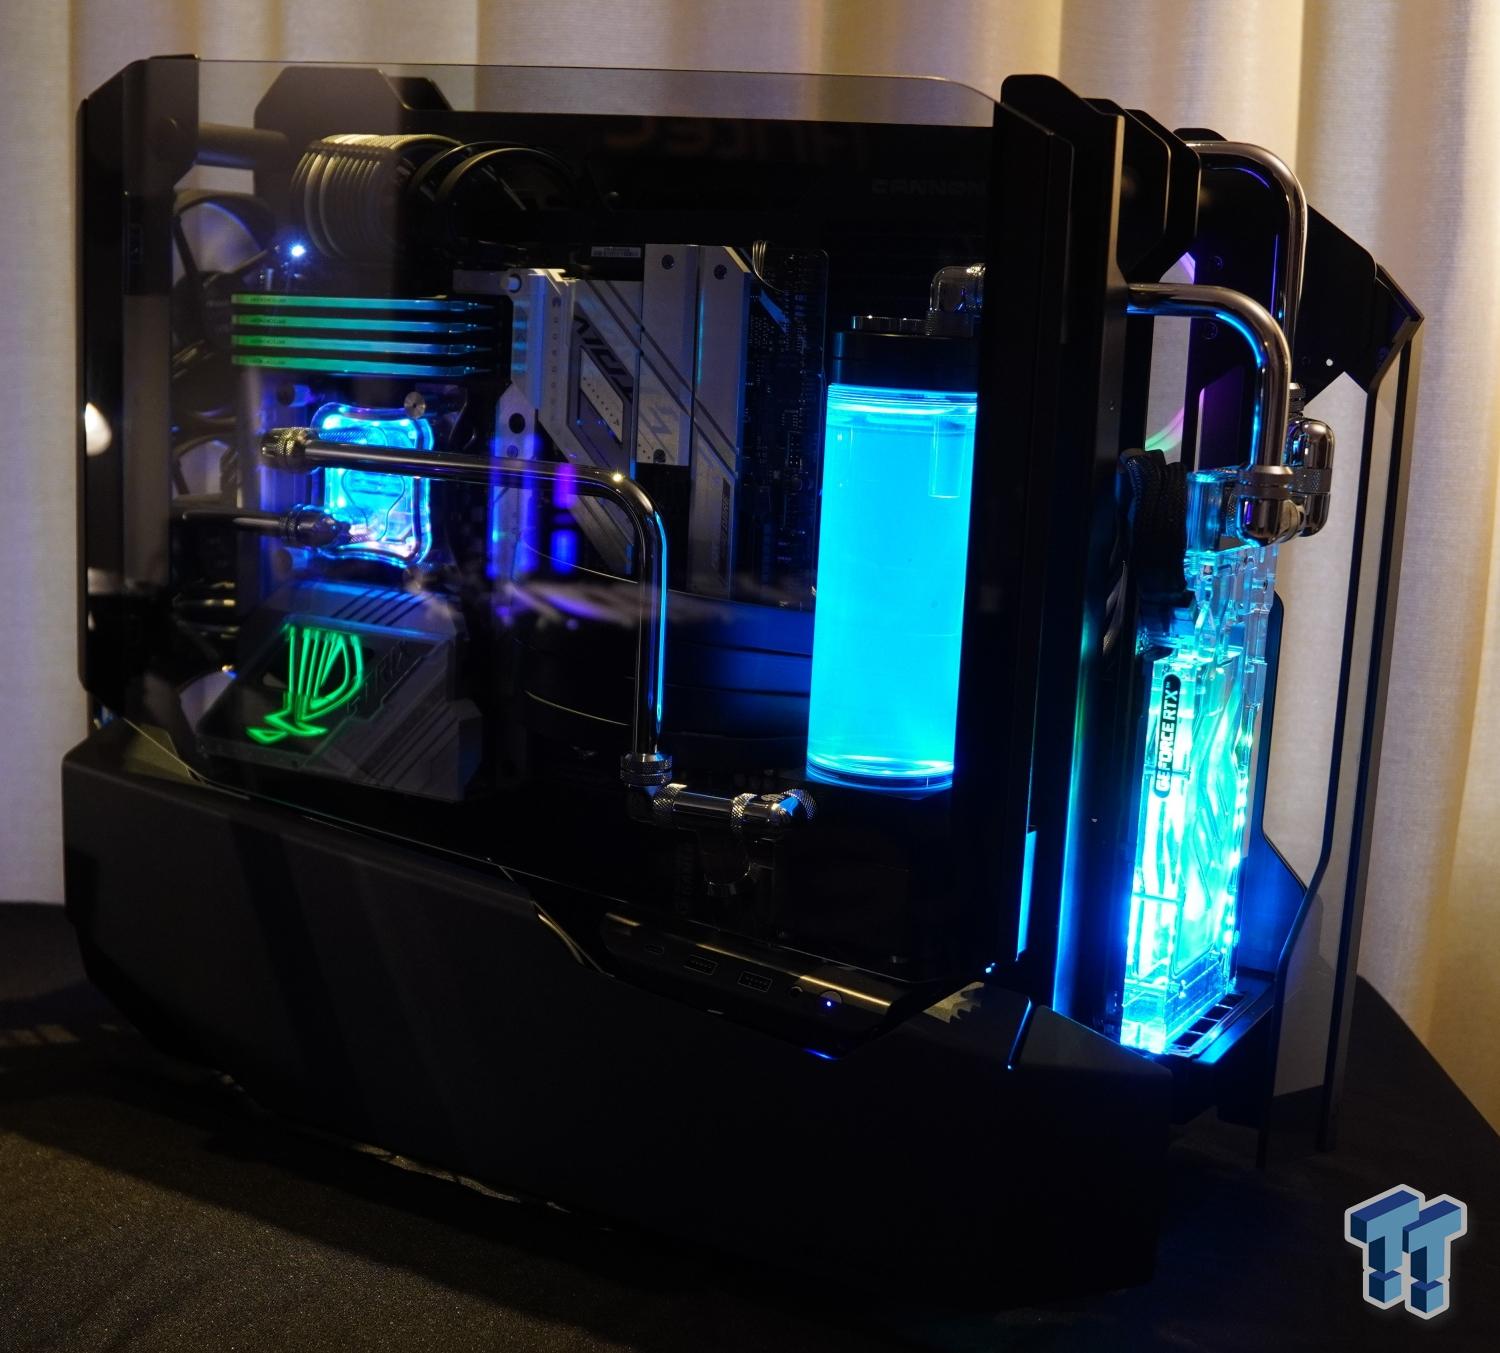 TweakTown Enlarged Image - The Antec Cannon, is a full-tower ATX case.